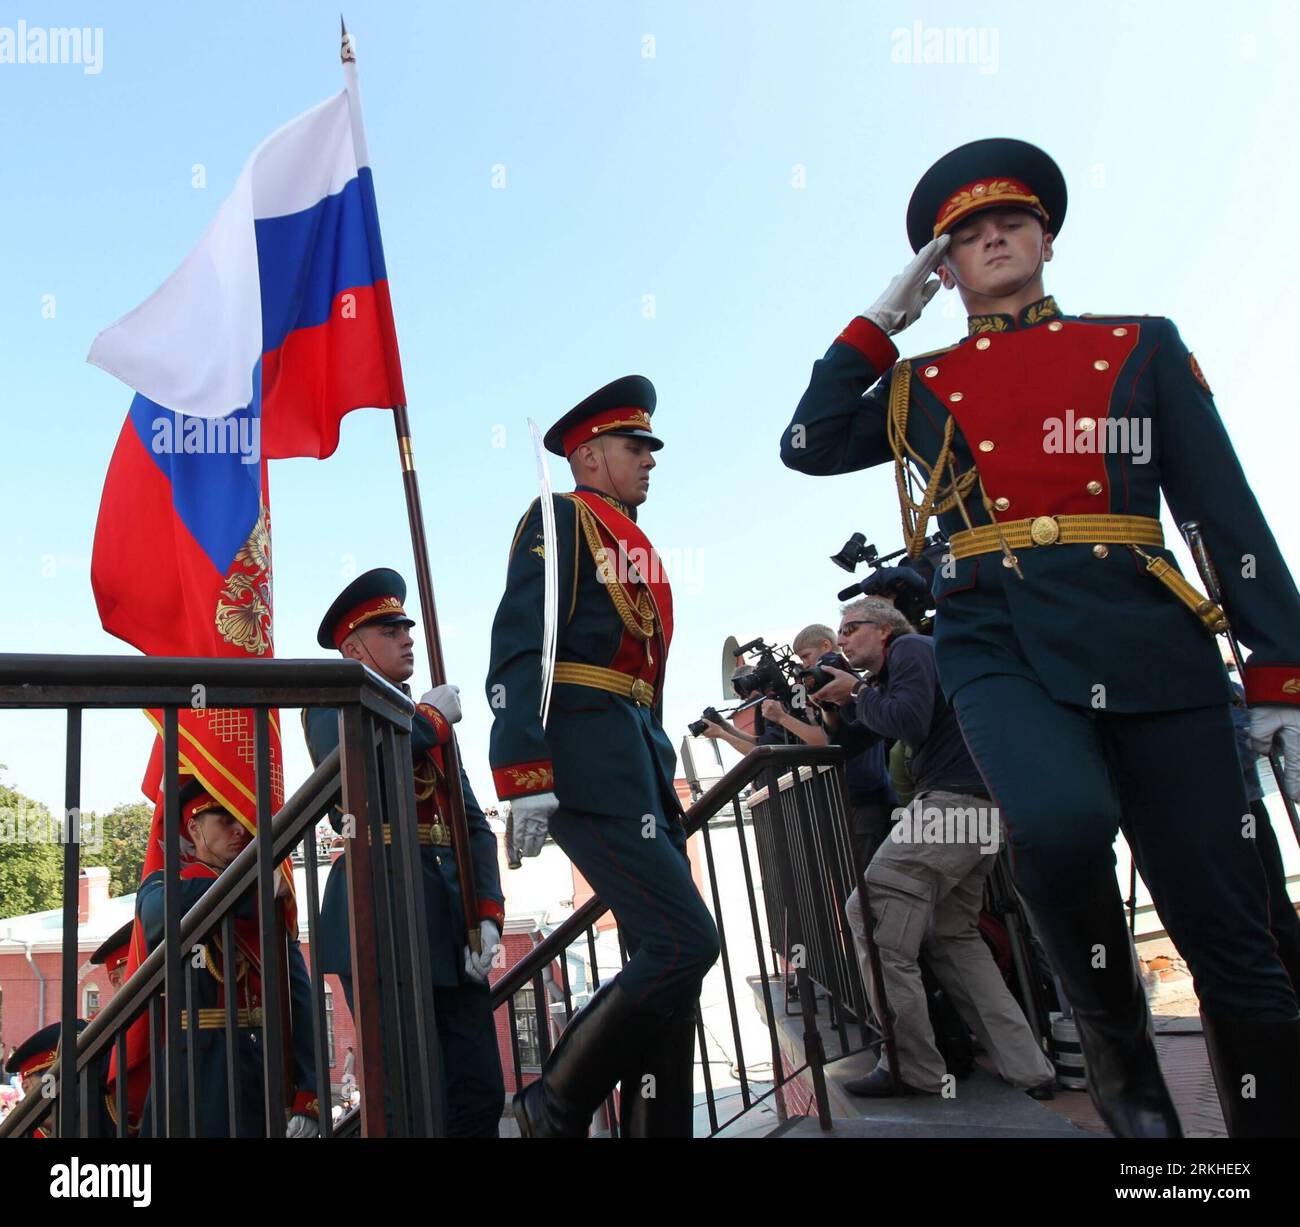 Bildnummer: 55811694  Datum: 22.08.2011  Copyright: imago/Xinhua (110822) -- ST. PETERSBURG, Aug. 22, 2011 (Xinhua) -- The flag-raising ceremony is held during celebrations for Russia s Flag Day in St. Petersburg, Russia, Aug. 22, 2011. Russia marked its National Flag day on Monday, a state holiday that dates back to Aug. 1991, which saw a failed coup attempt in Moscow. (Xinhua/Lu Jinbo) (wjd) RUSSIA-FLAG DAY-CELEBRATIONS PUBLICATIONxNOTxINxCHN Gesellschaft Militär Flagge Gedenken Putschversuch Putsch 20. Jahrestag Nationalfahne Flaggentag xjh premiumd 2011 quadrat o0 Soldat Fahnenappell Appel Stock Photo